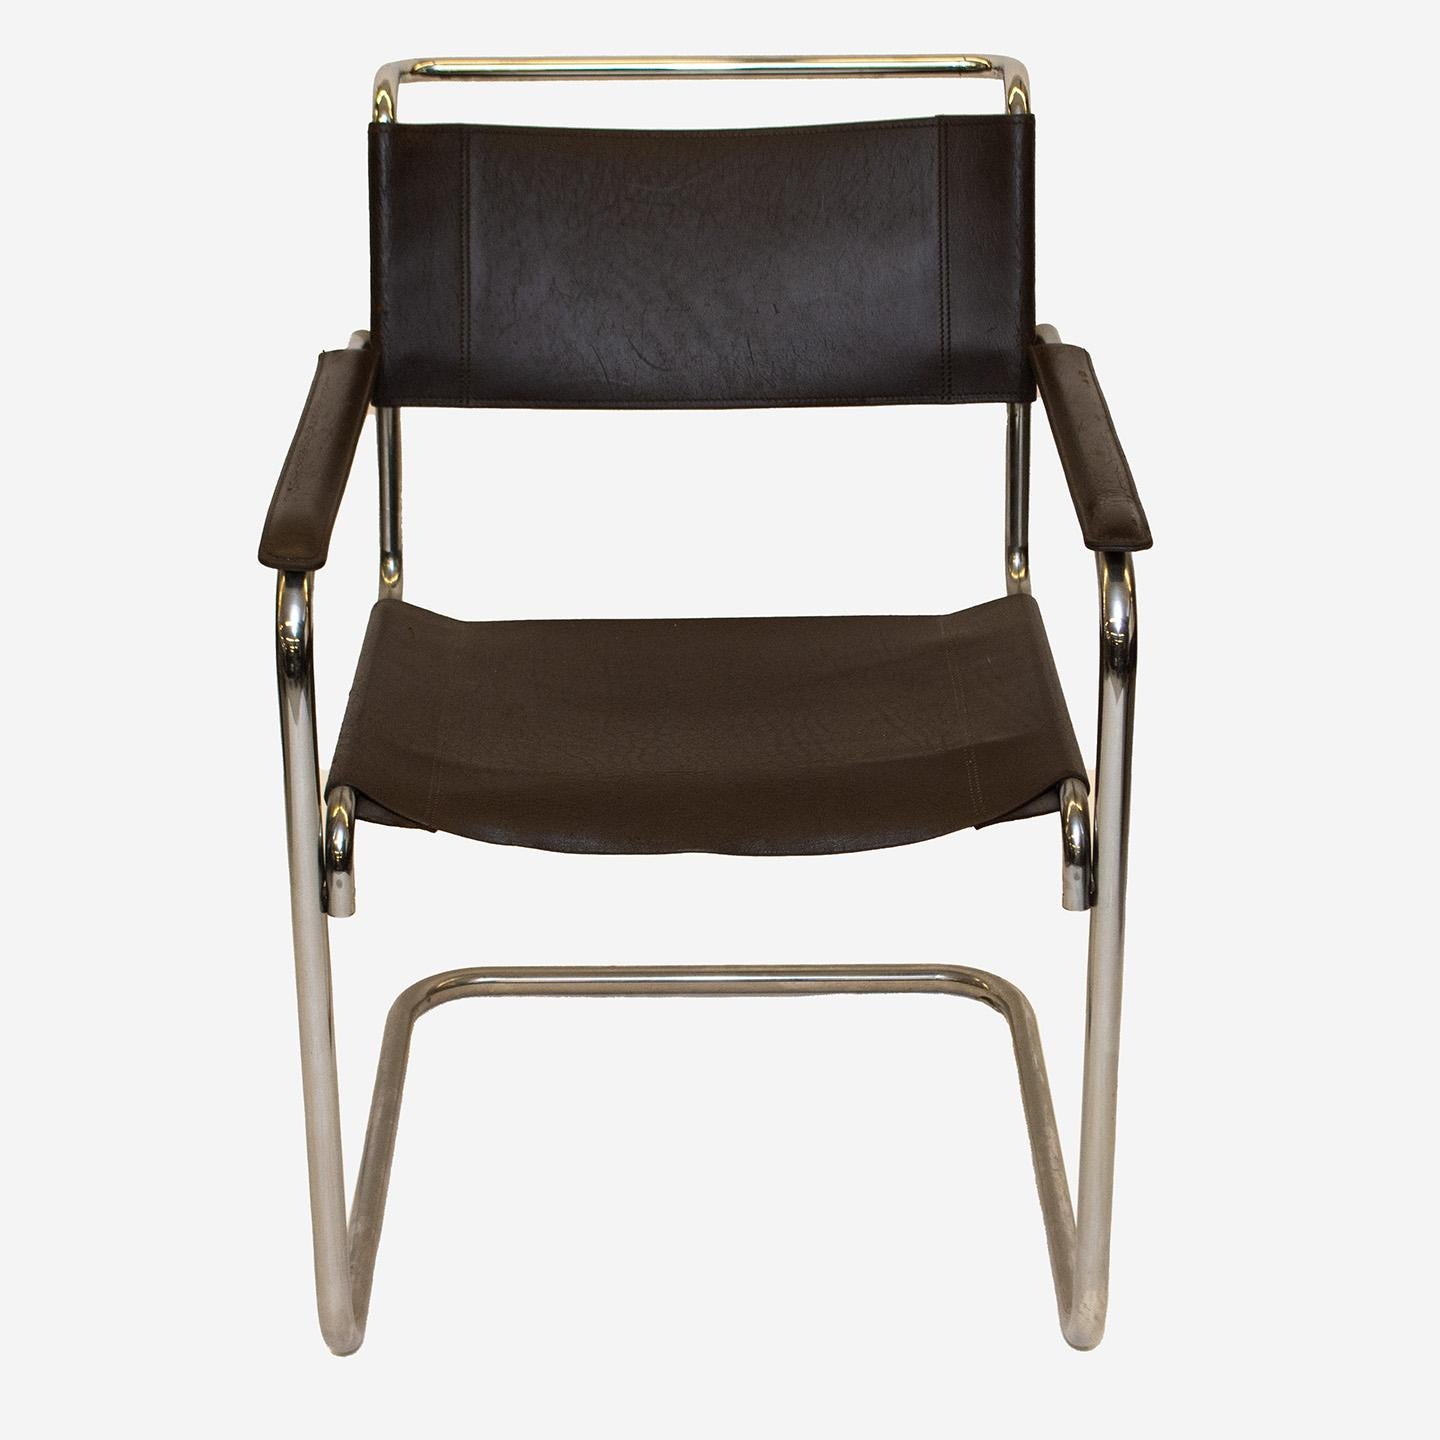 The B34 chair was designed by Marcel Breuer between 1920 and 1949 for Thonet in Germany. This iconic Bauhaus design features a steel tubular frame, a deep brown saddle leather seat, backrest, and armrest covers. This item is offered as a pair in